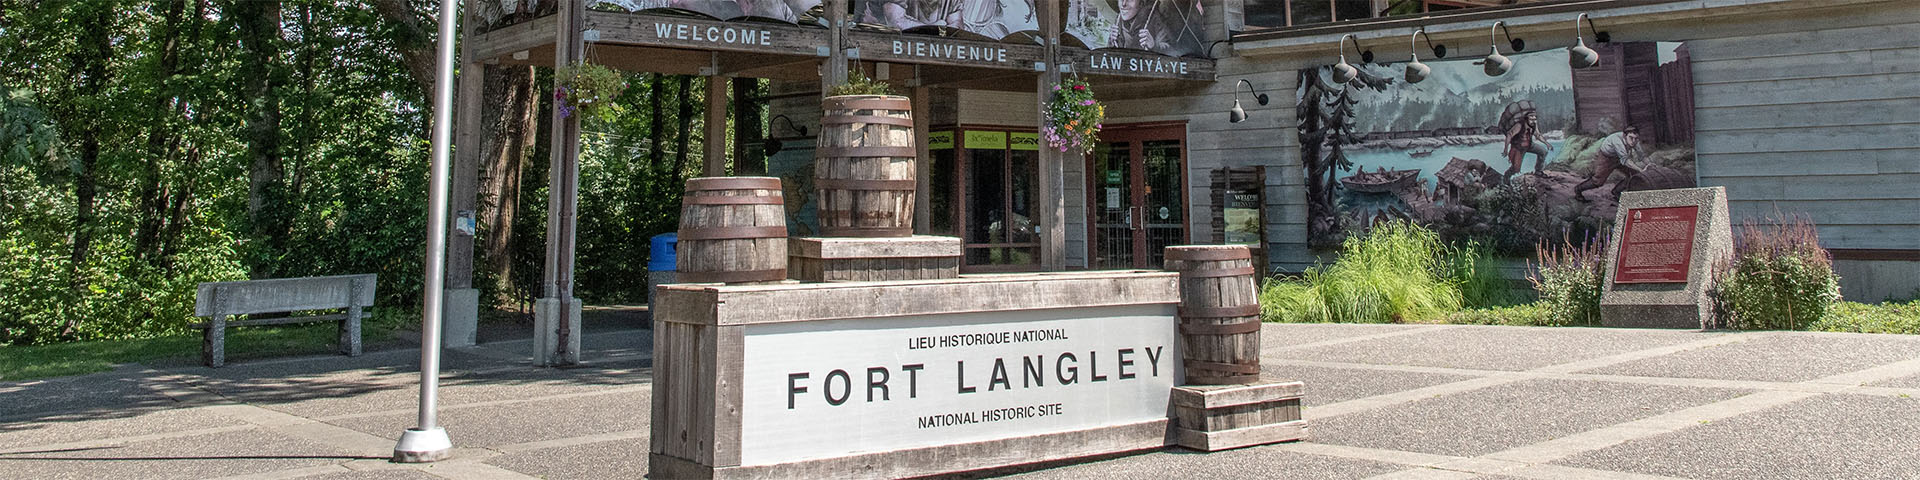 The entrance to Fort Langley National Historic Site via the visitor center